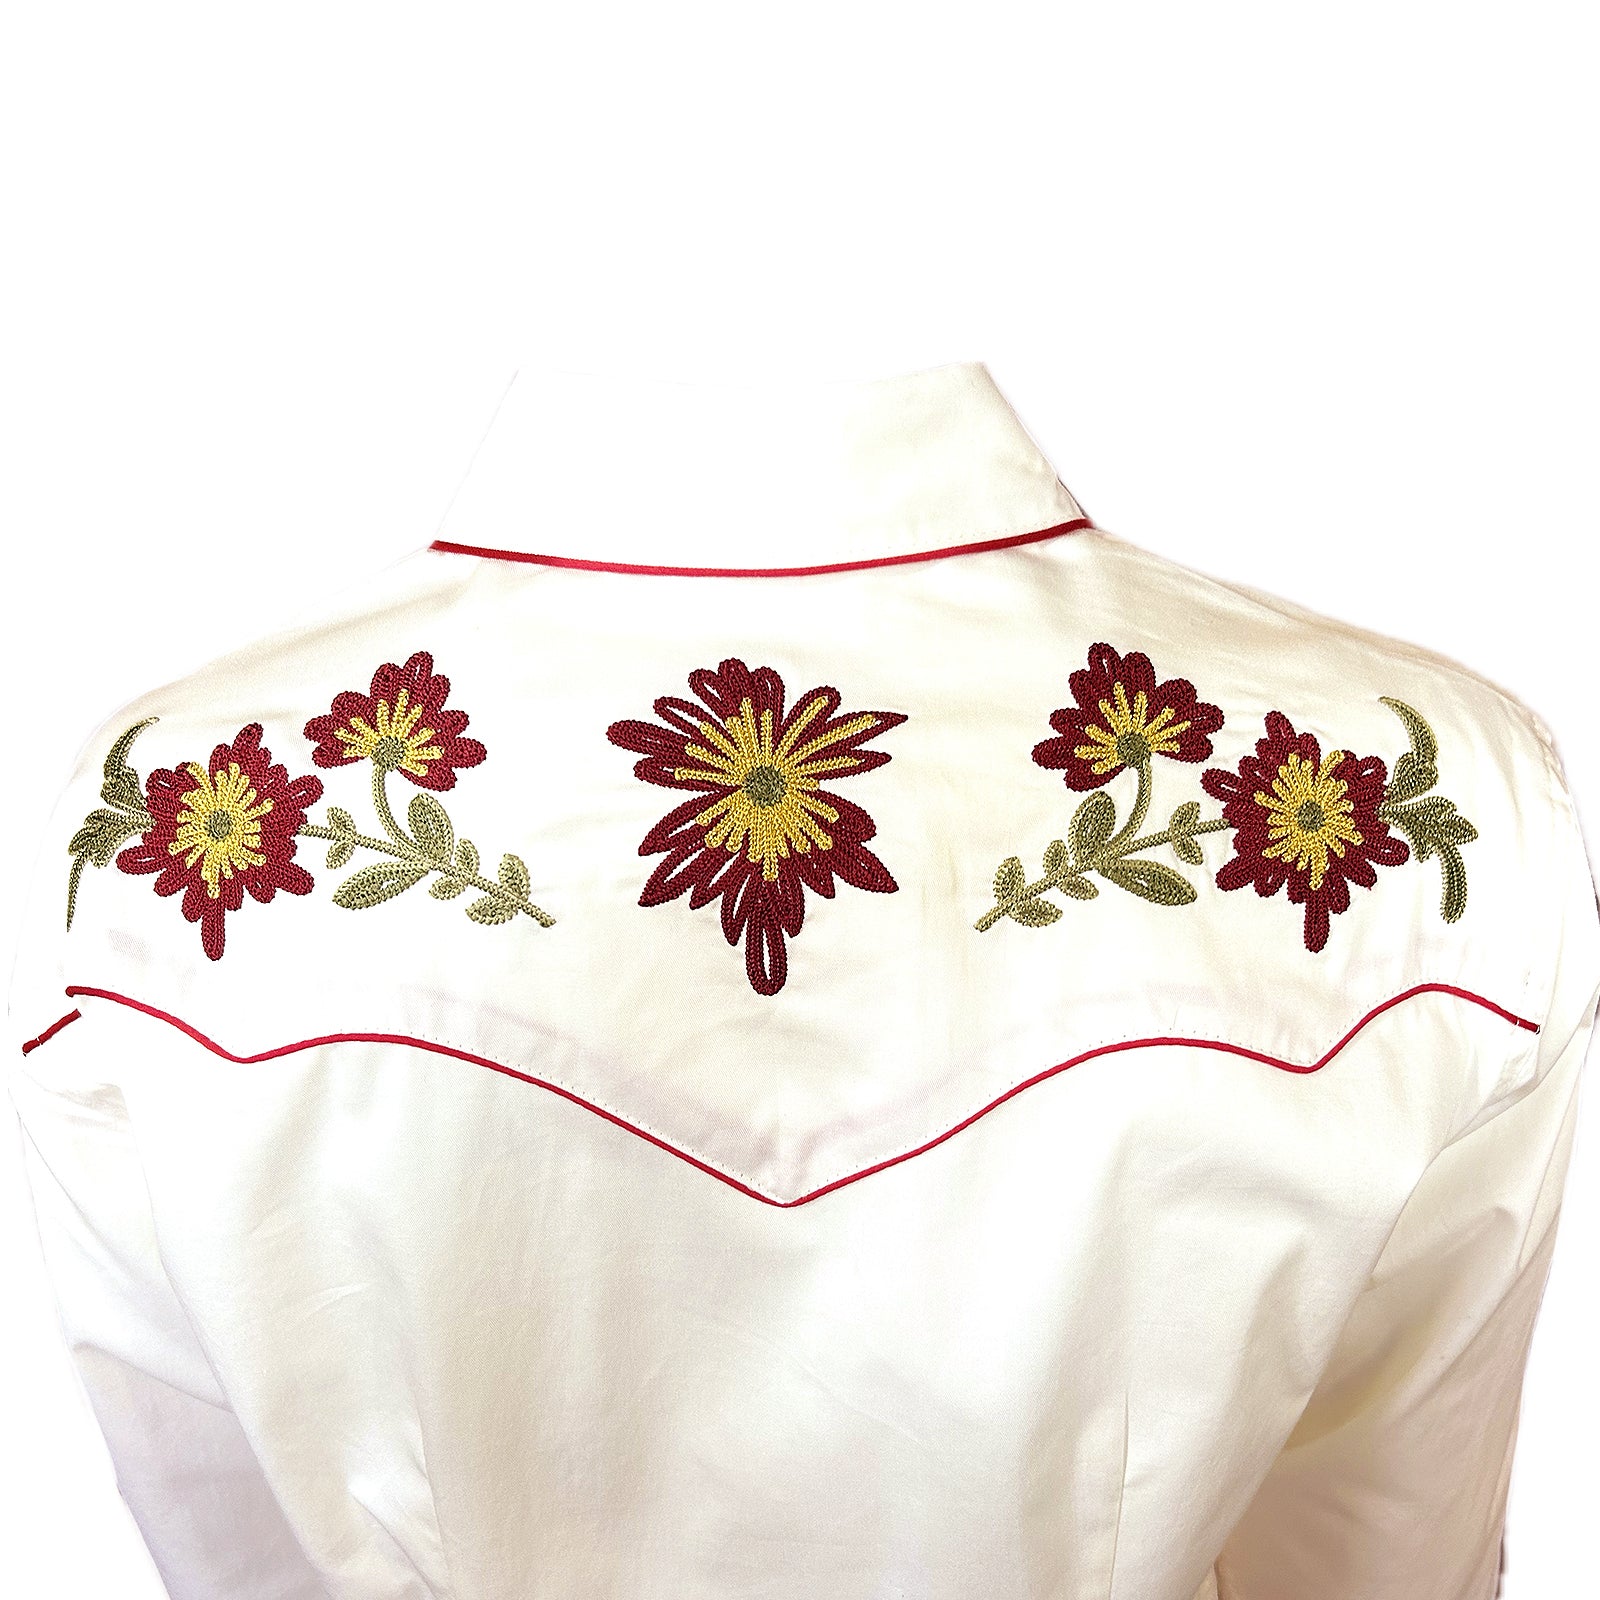 Women's Ivory Vintage Floral Embroidered Western Shirt